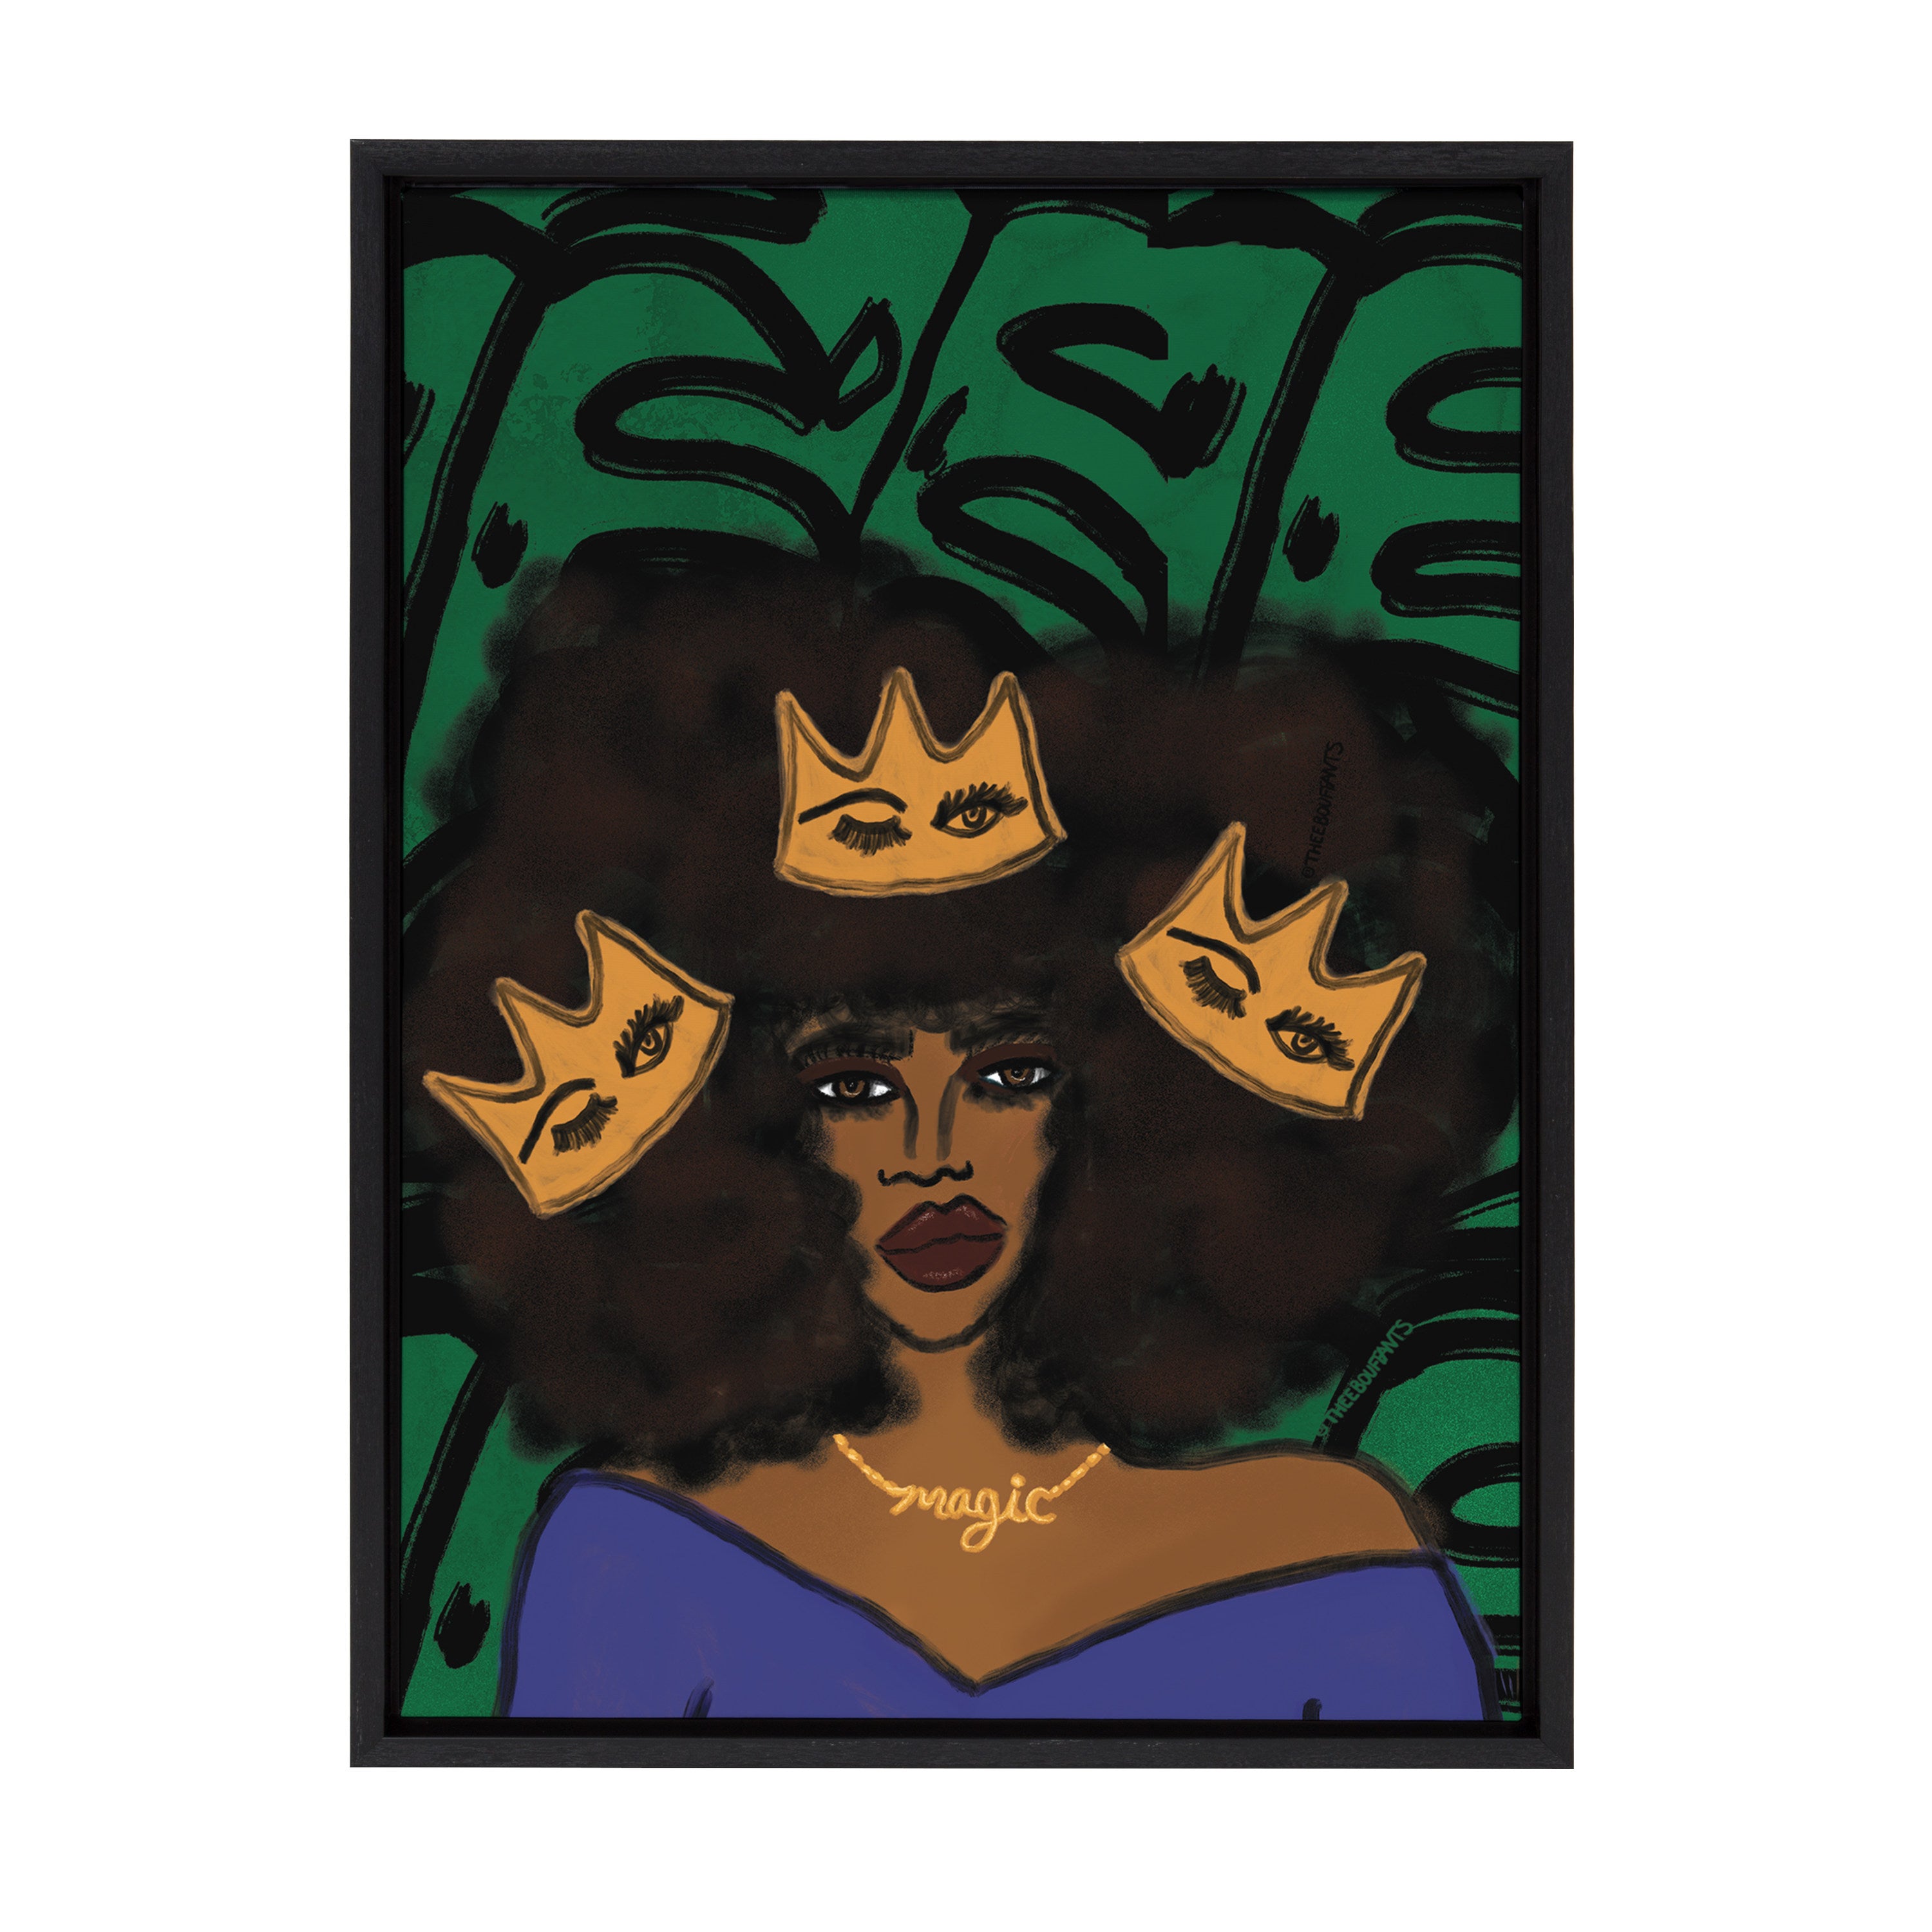 Sylvie Wear Your Crown Framed Canvas by Kendra Dandy of Bouffants and Broken Hearts